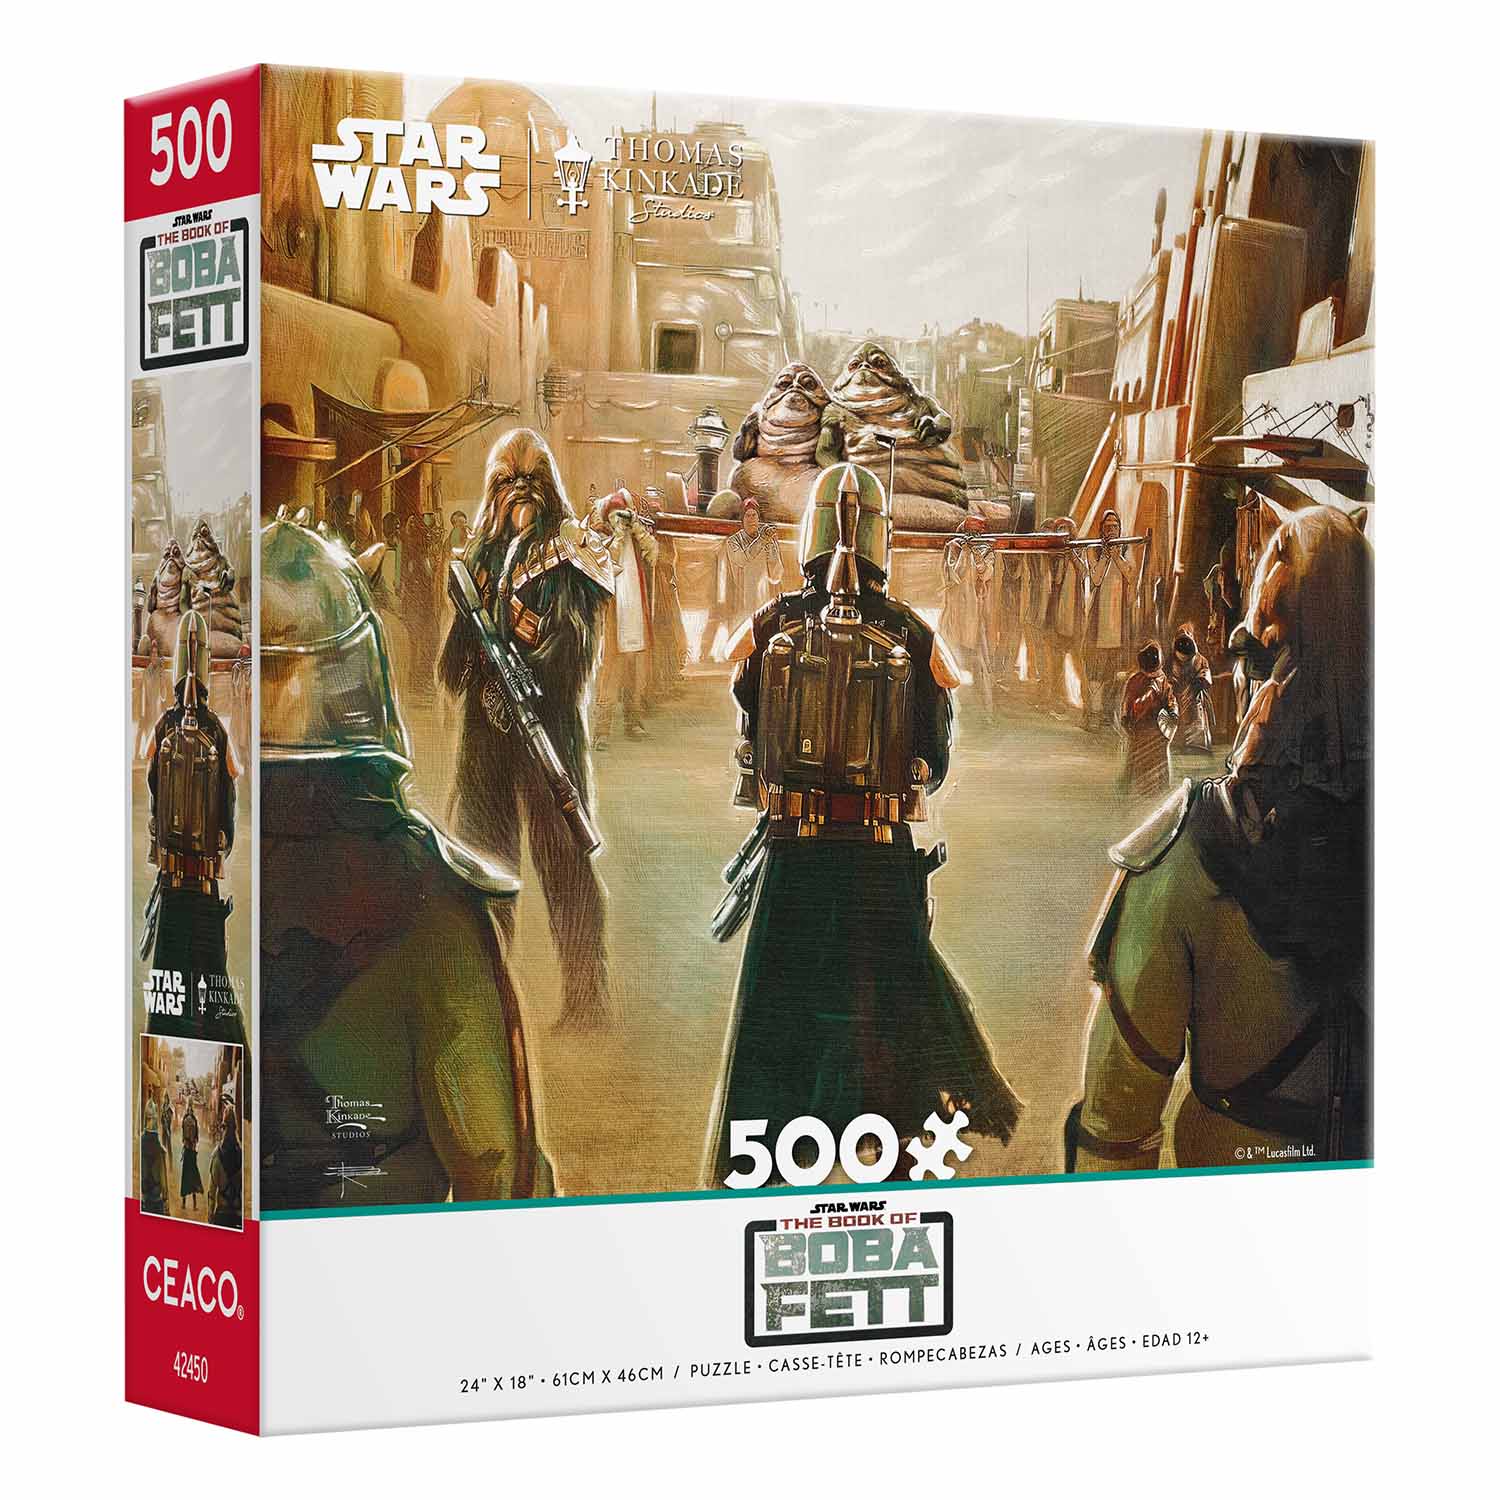 Ceaco-Thomas Kinkade Star Wars: The Book of Boba Fett - A New Challenge - 500 Piece Puzzle-2477-02-Legacy Toys